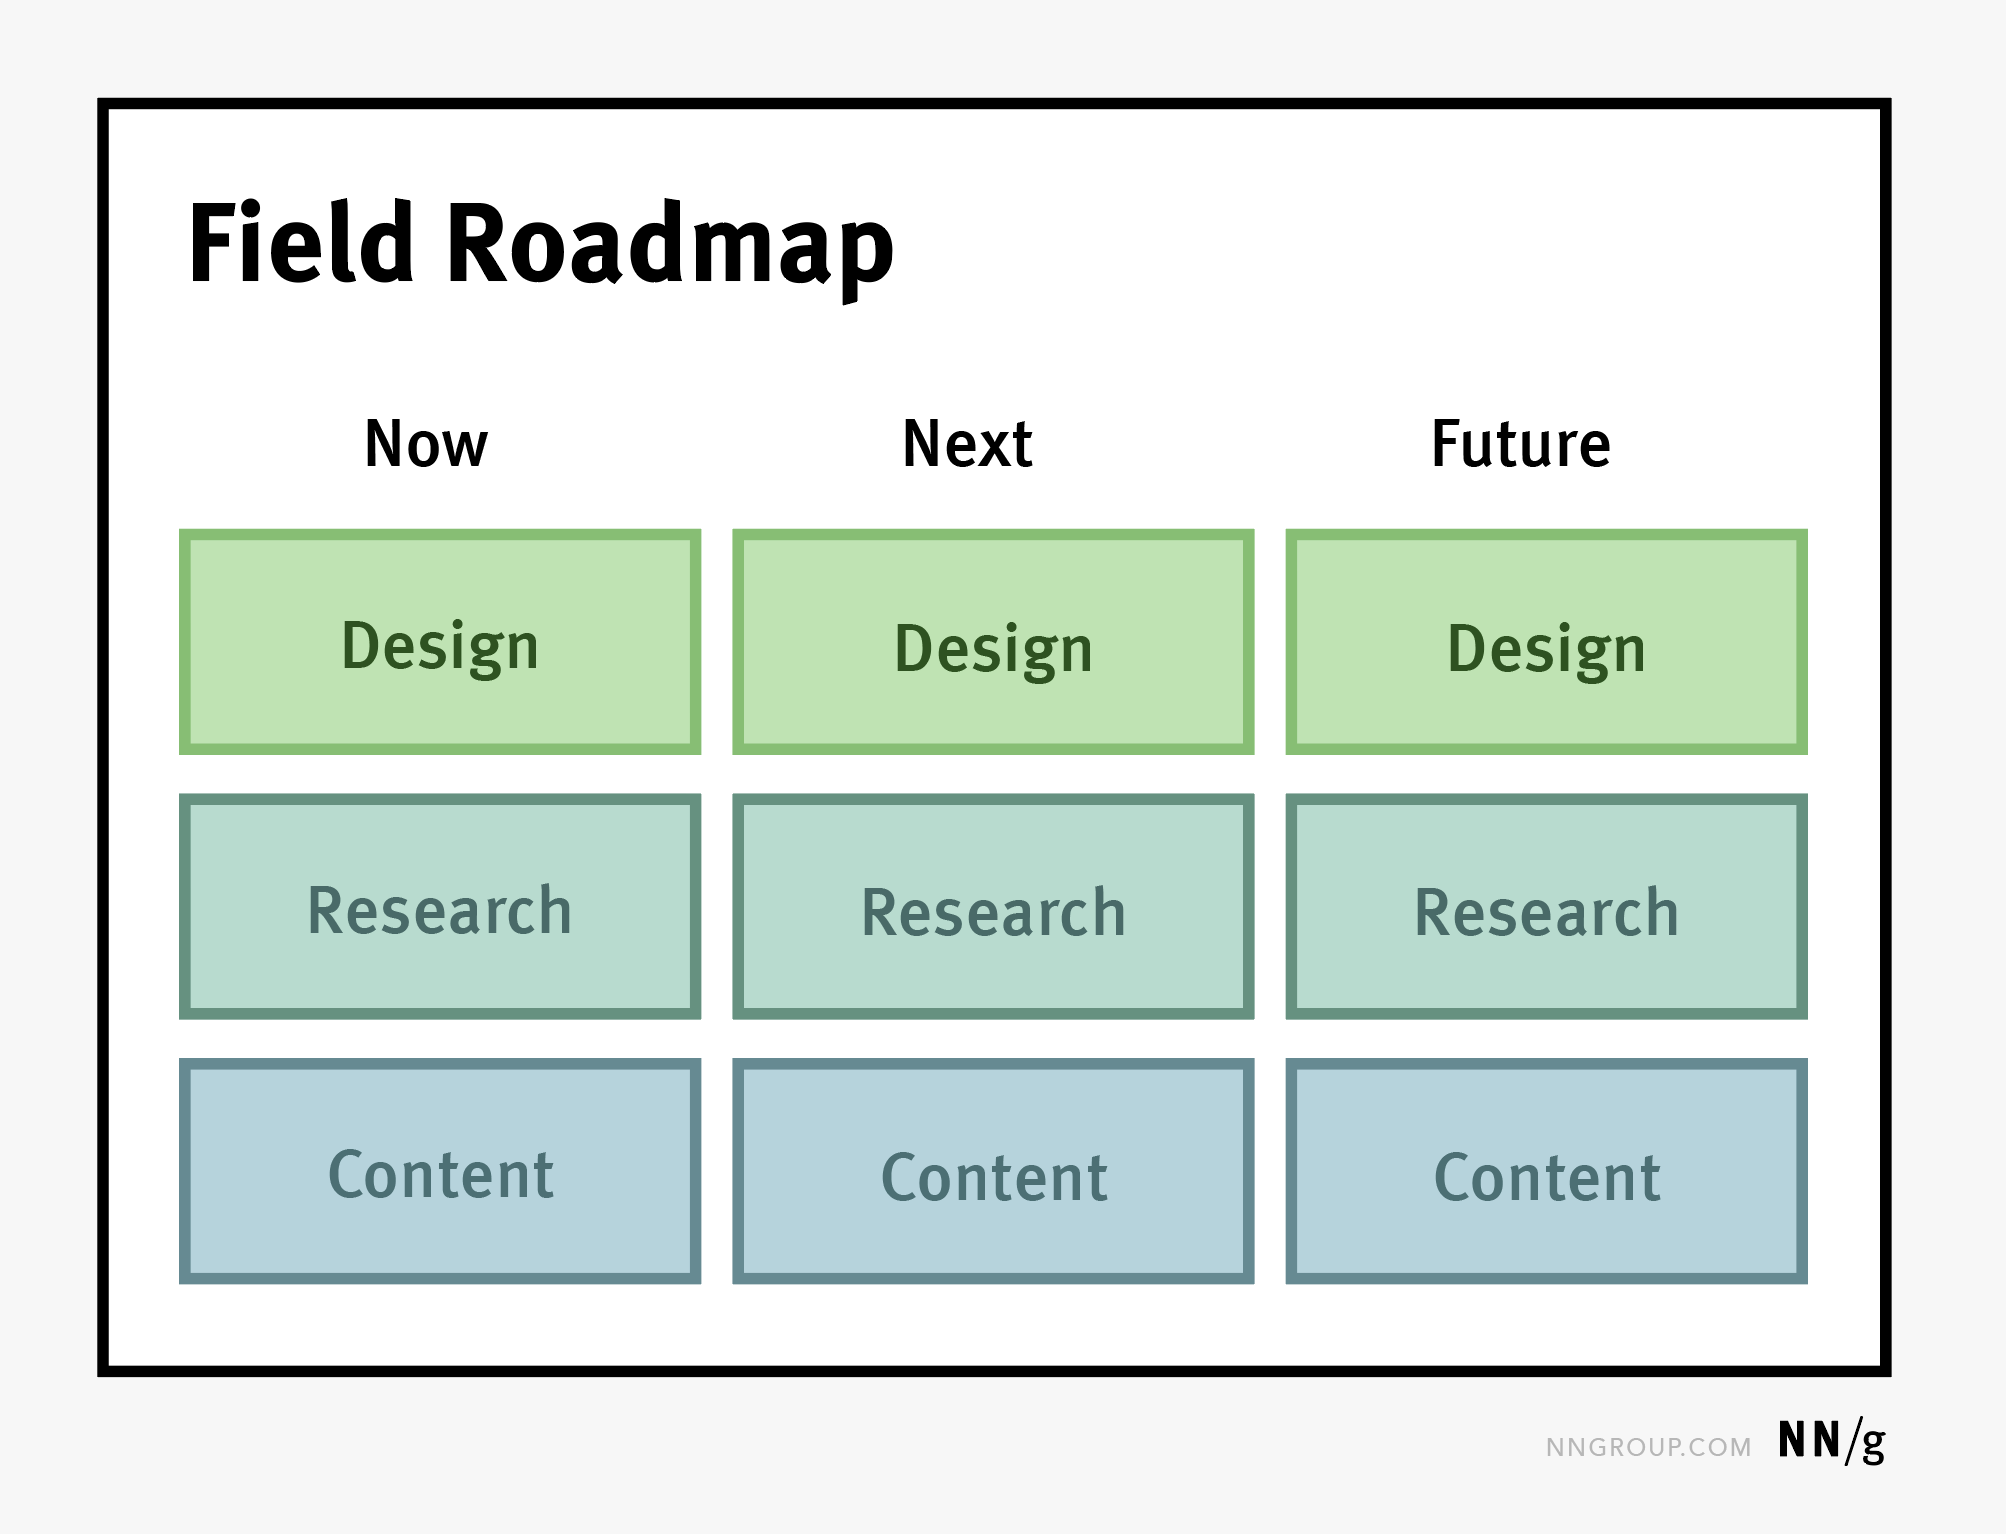 Field roadmaps map UX work, including research, design, and content. 